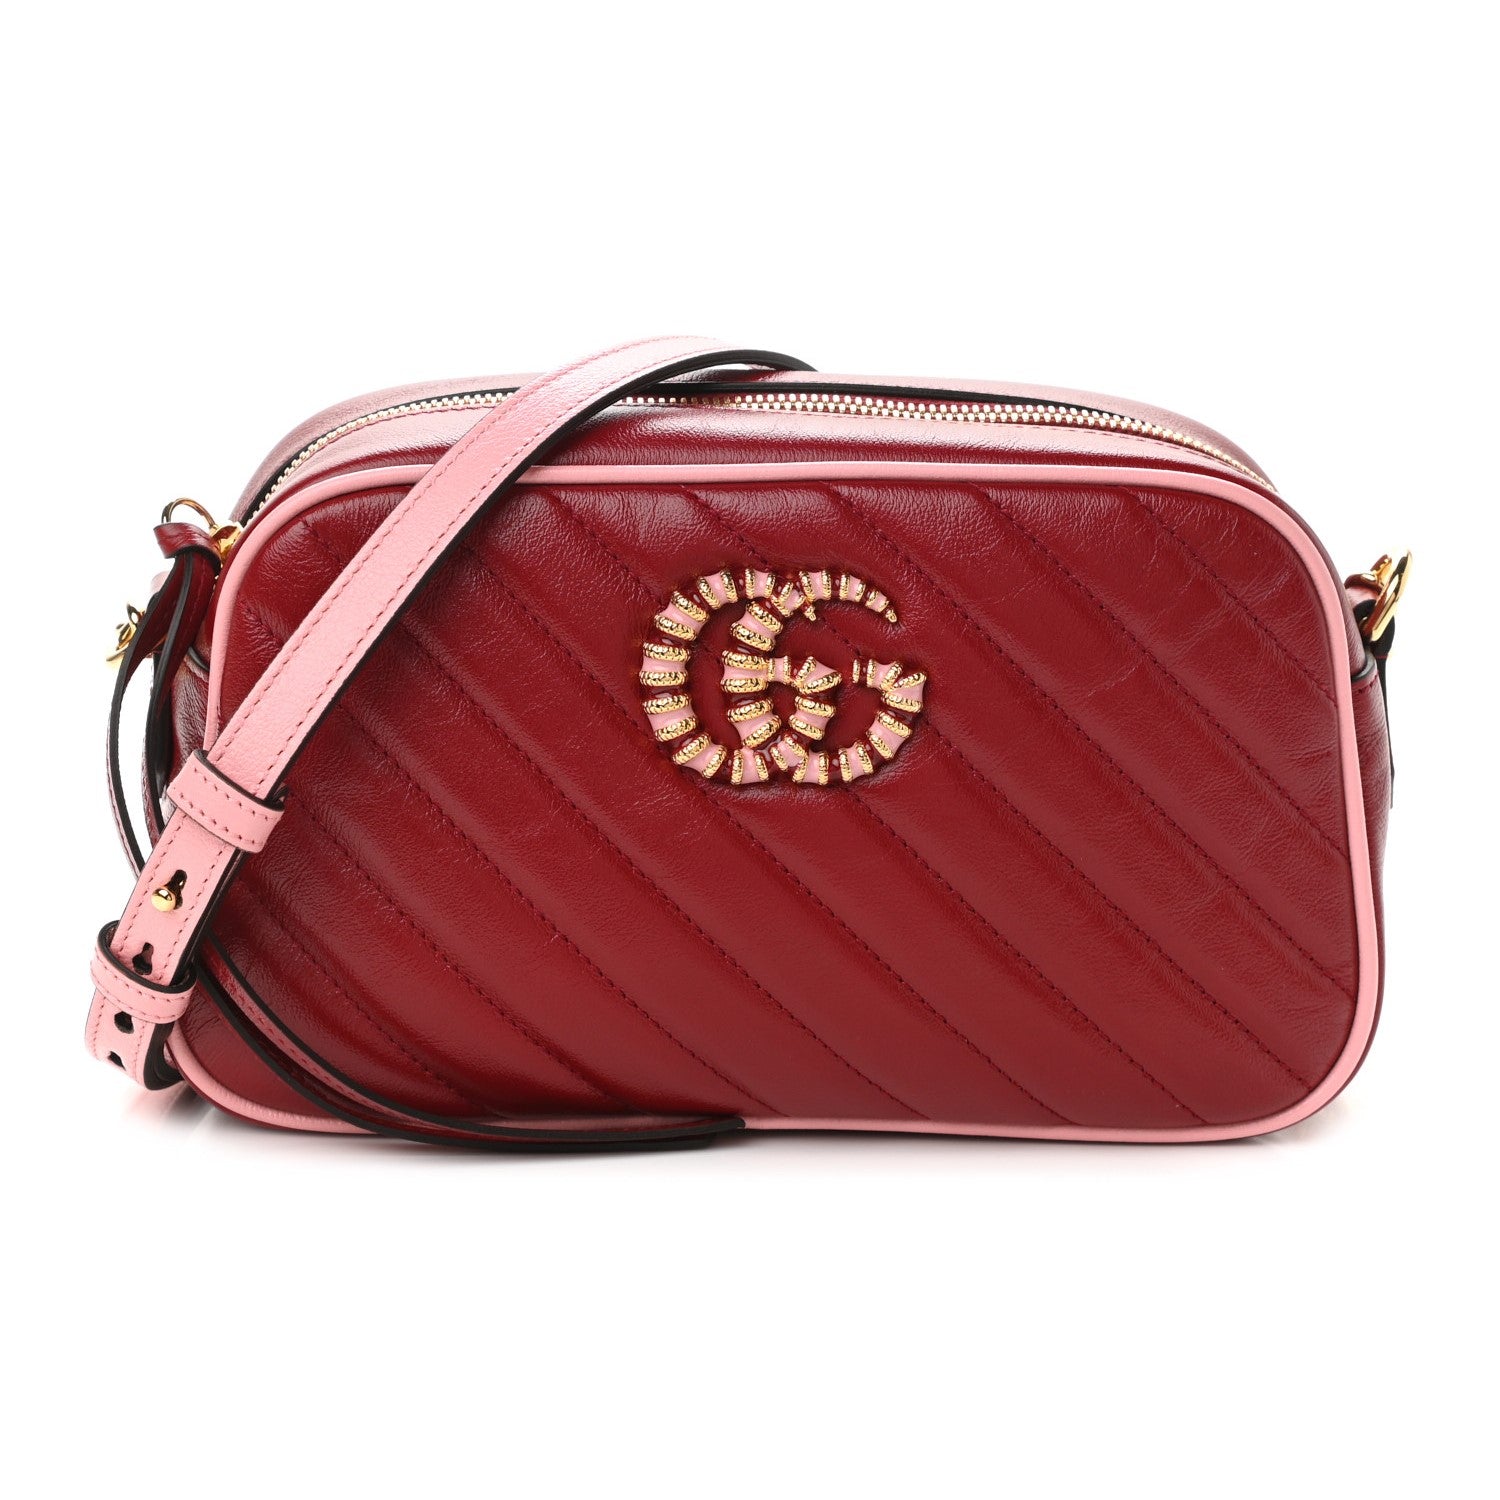 Gucci Marmont Red Leather Diagonal Matelasse Shoulder Bag 447632 at_Queen_Bee_of_Beverly_Hills